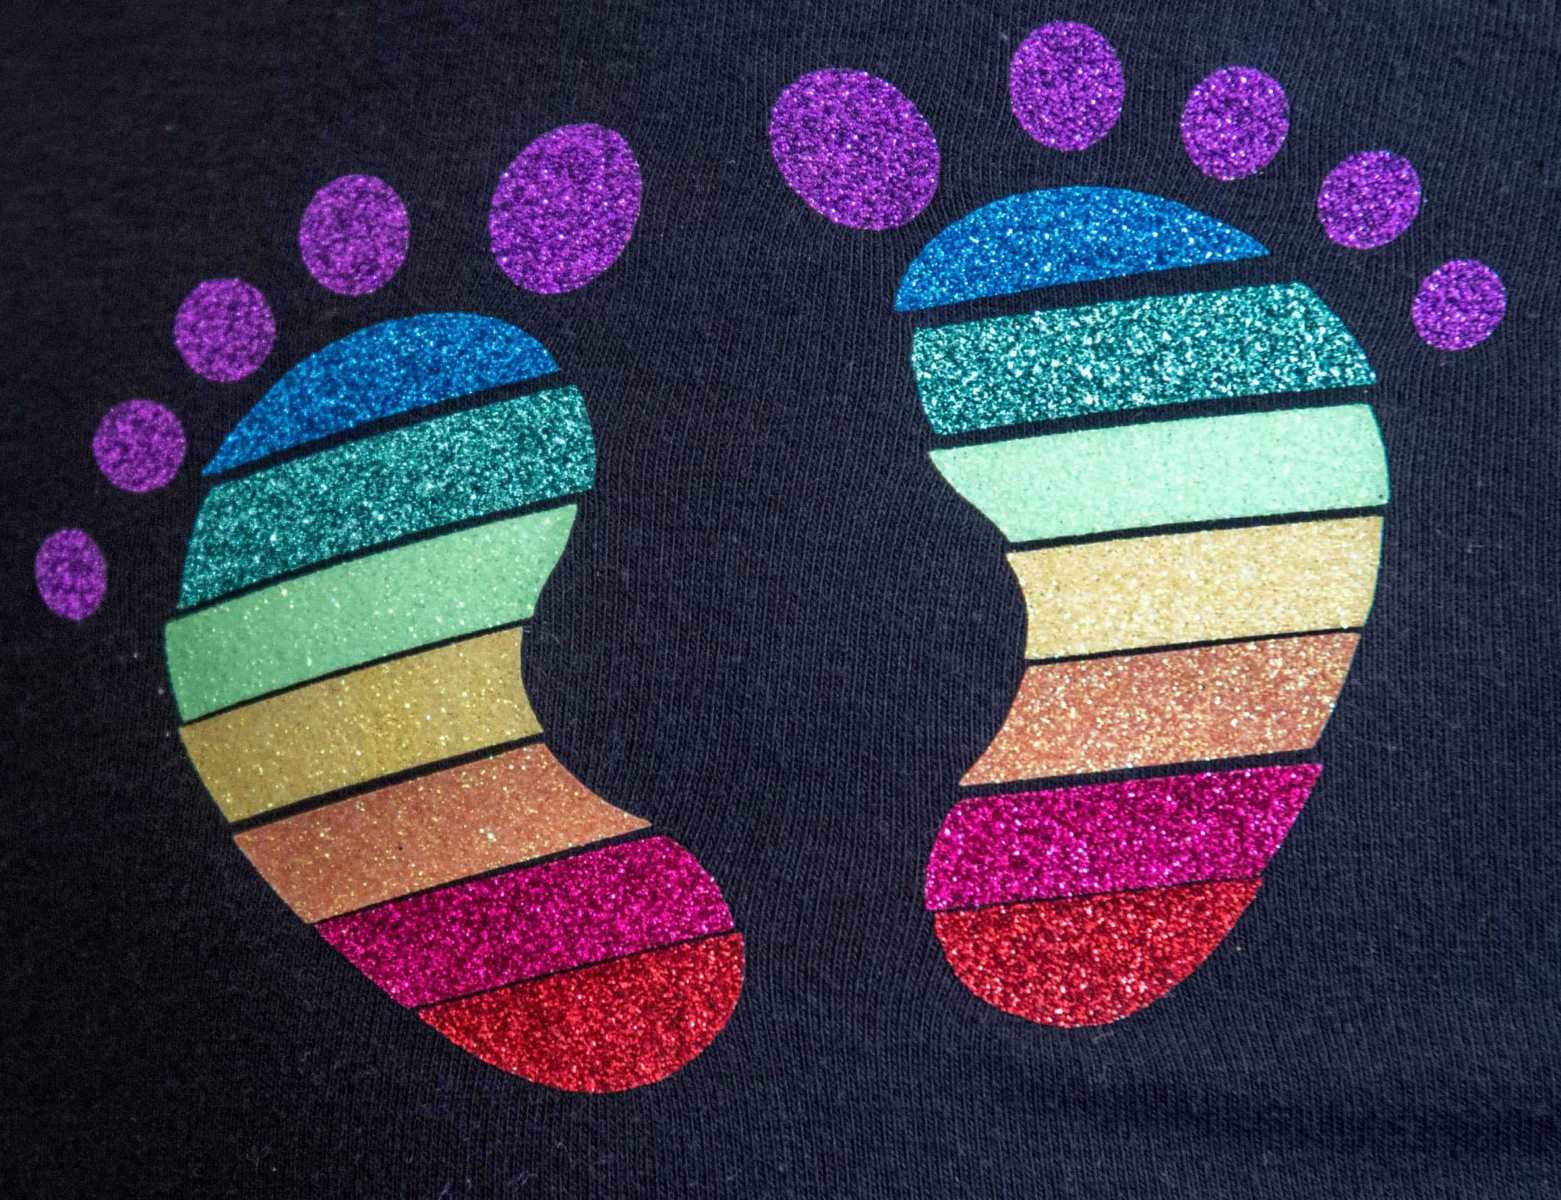 The Meaning And Origin Of ‘Rainbow Babies’